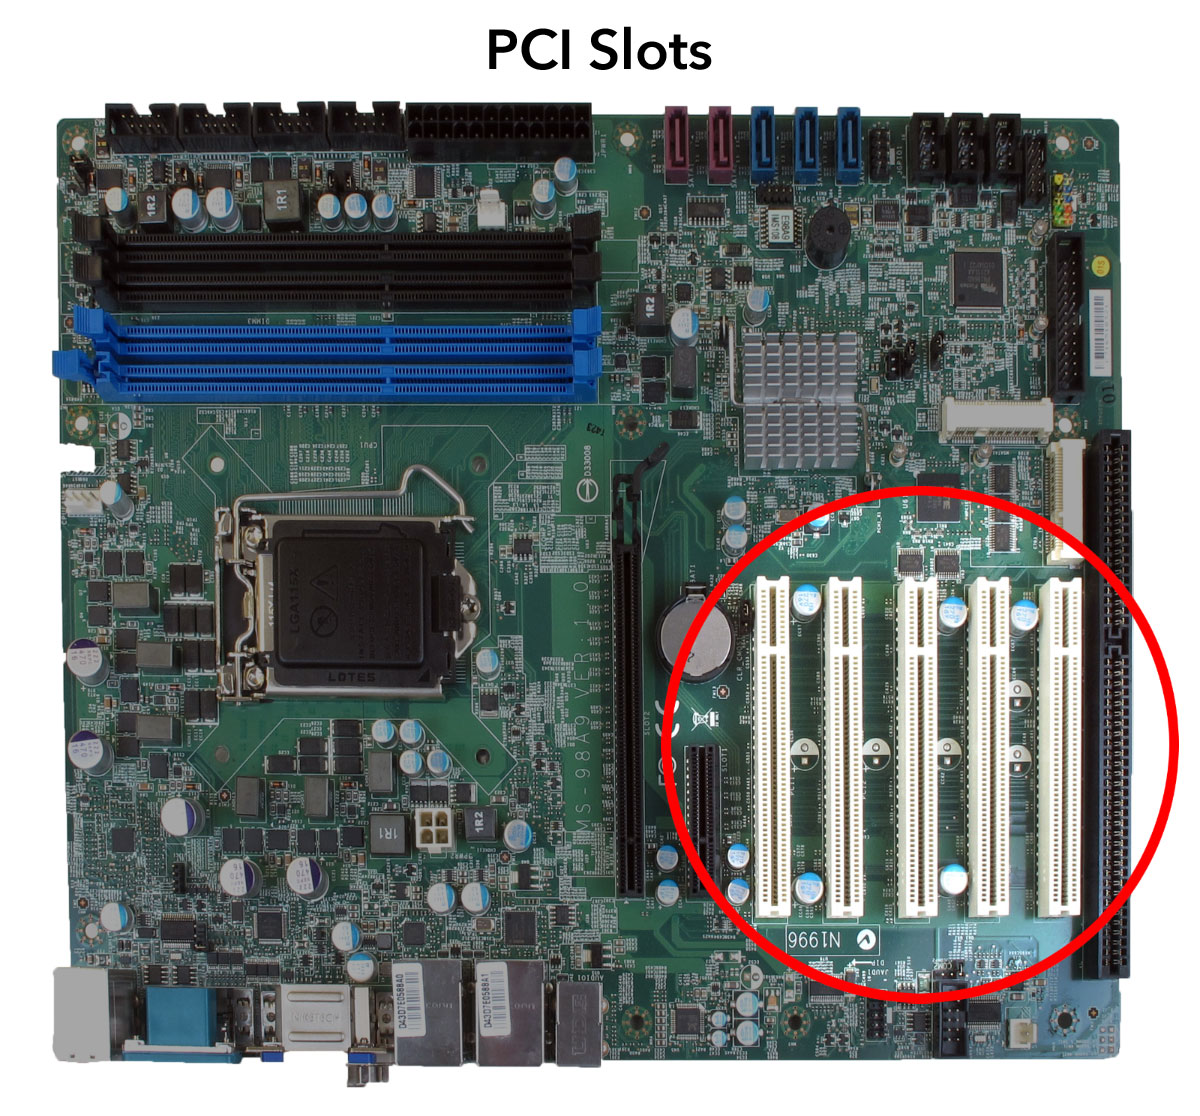 Expansion Slot Definition And Function - goodpb